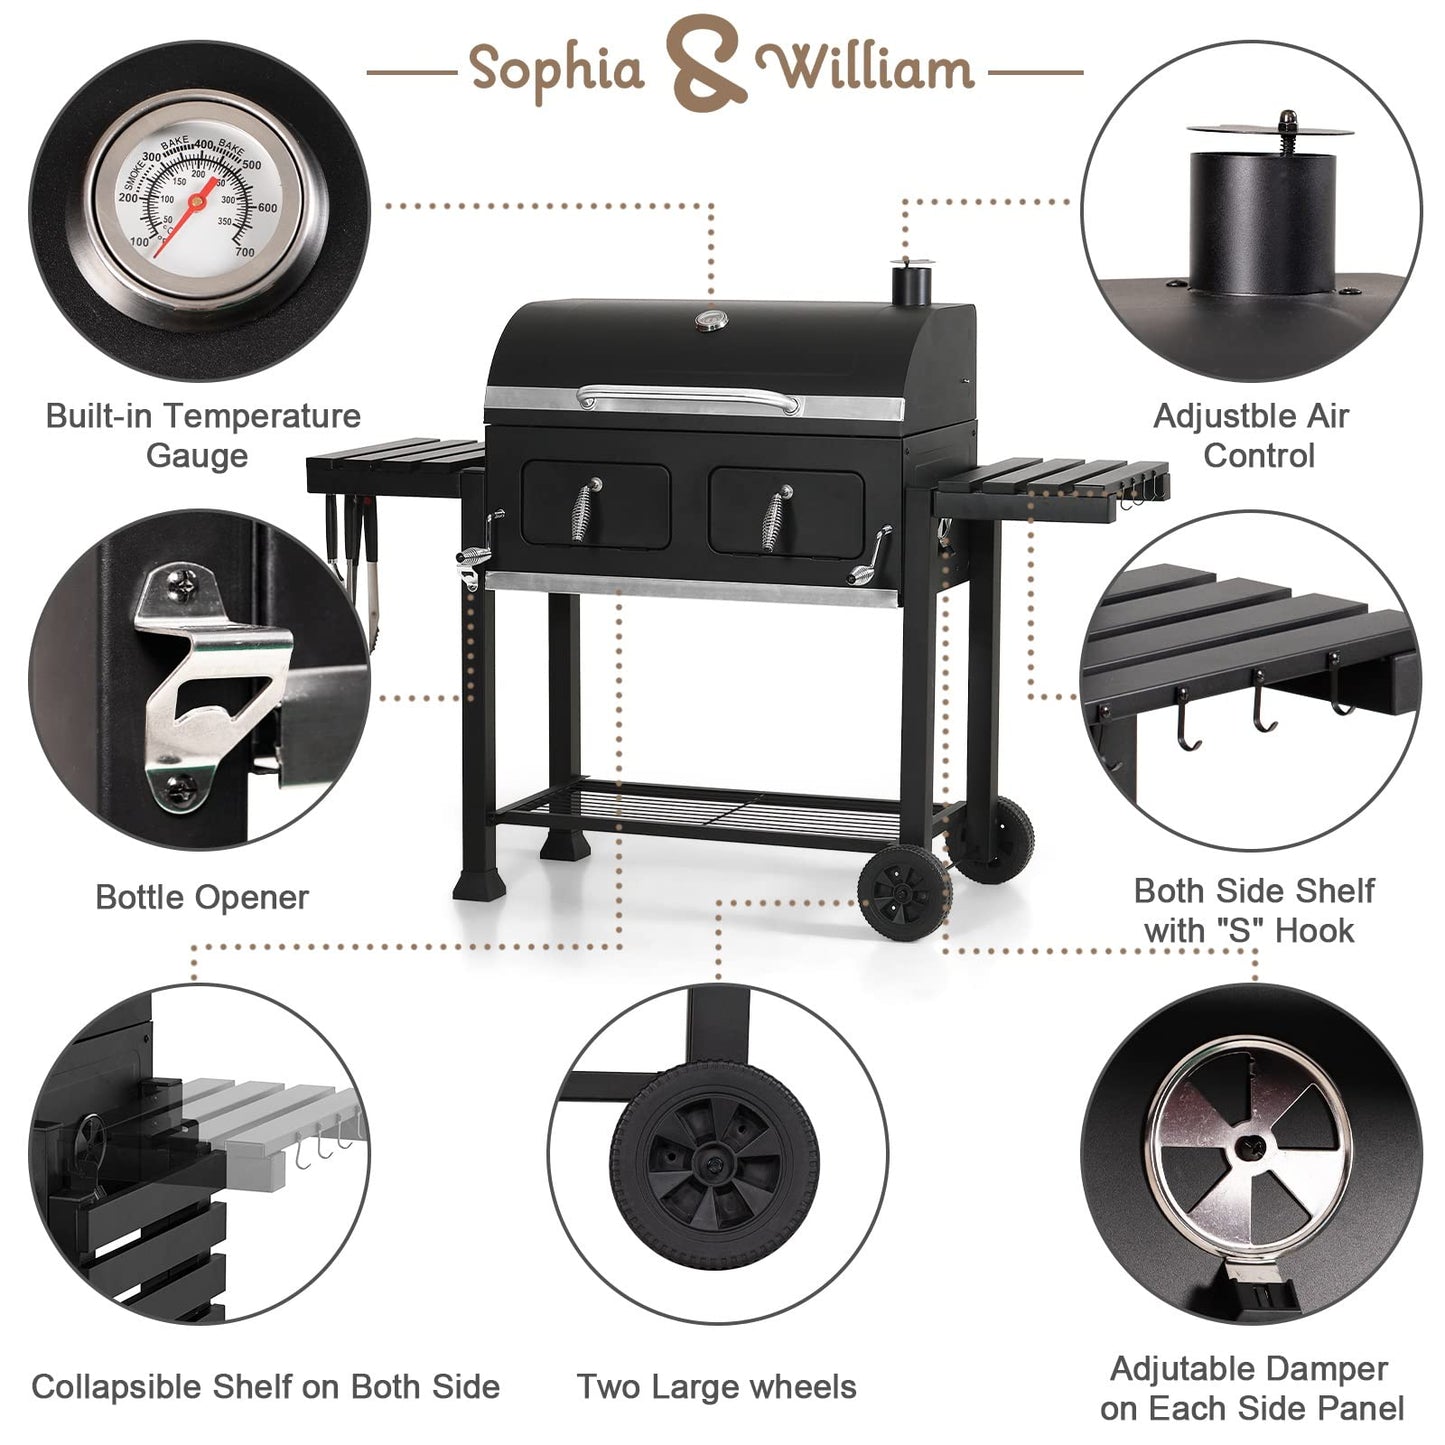 Sophia & William Extra Large Charcoal BBQ Grills with 794 SQ.IN. Cooking Area, Outdoor Barbecue Grill with Dual-Zone Individual & Adjustable Charcoal Tray and 2 Foldable Side Table, Black